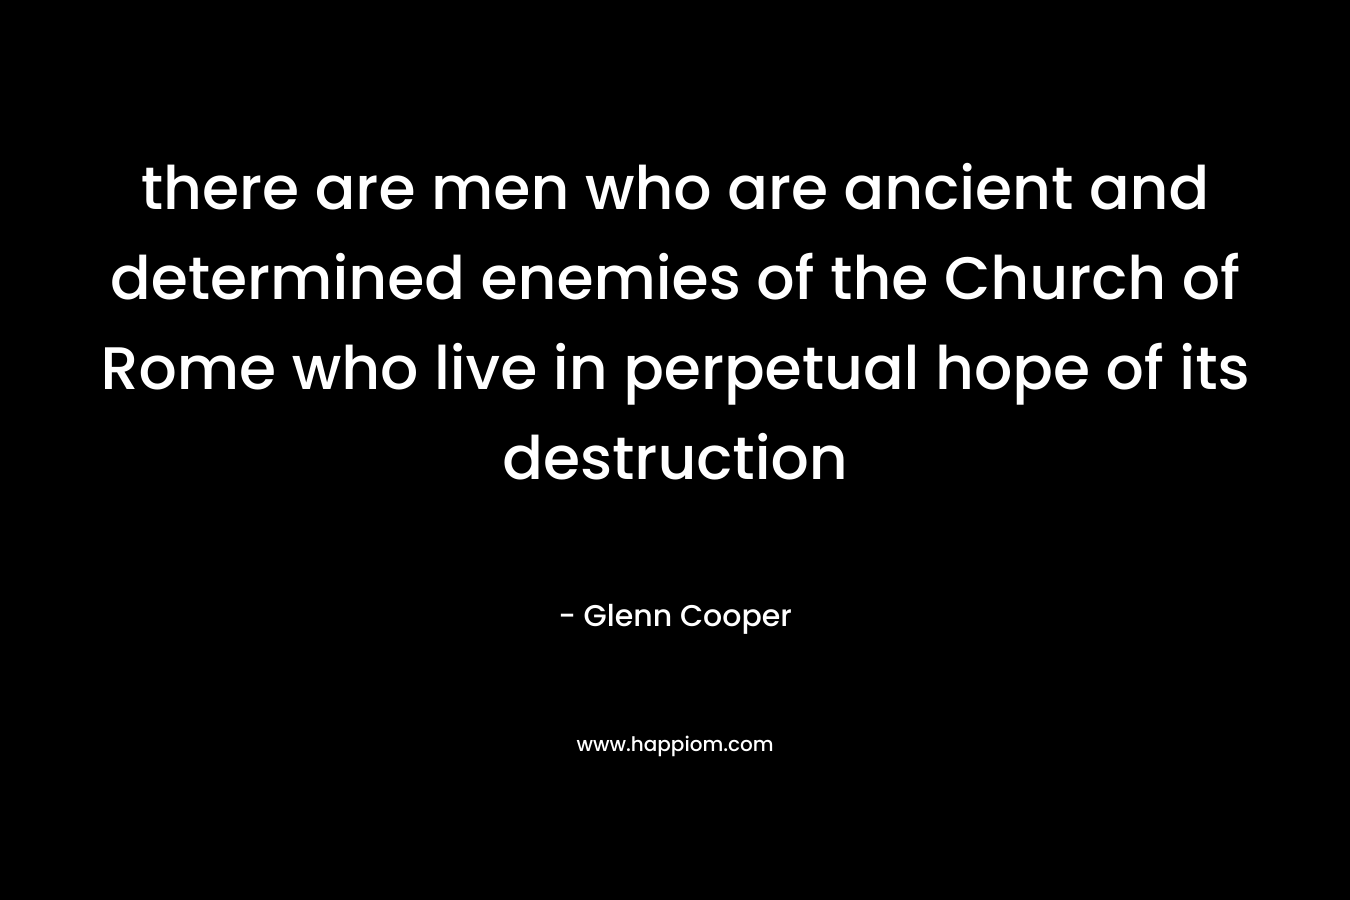 there are men who are ancient and determined enemies of the Church of Rome who live in perpetual hope of its destruction